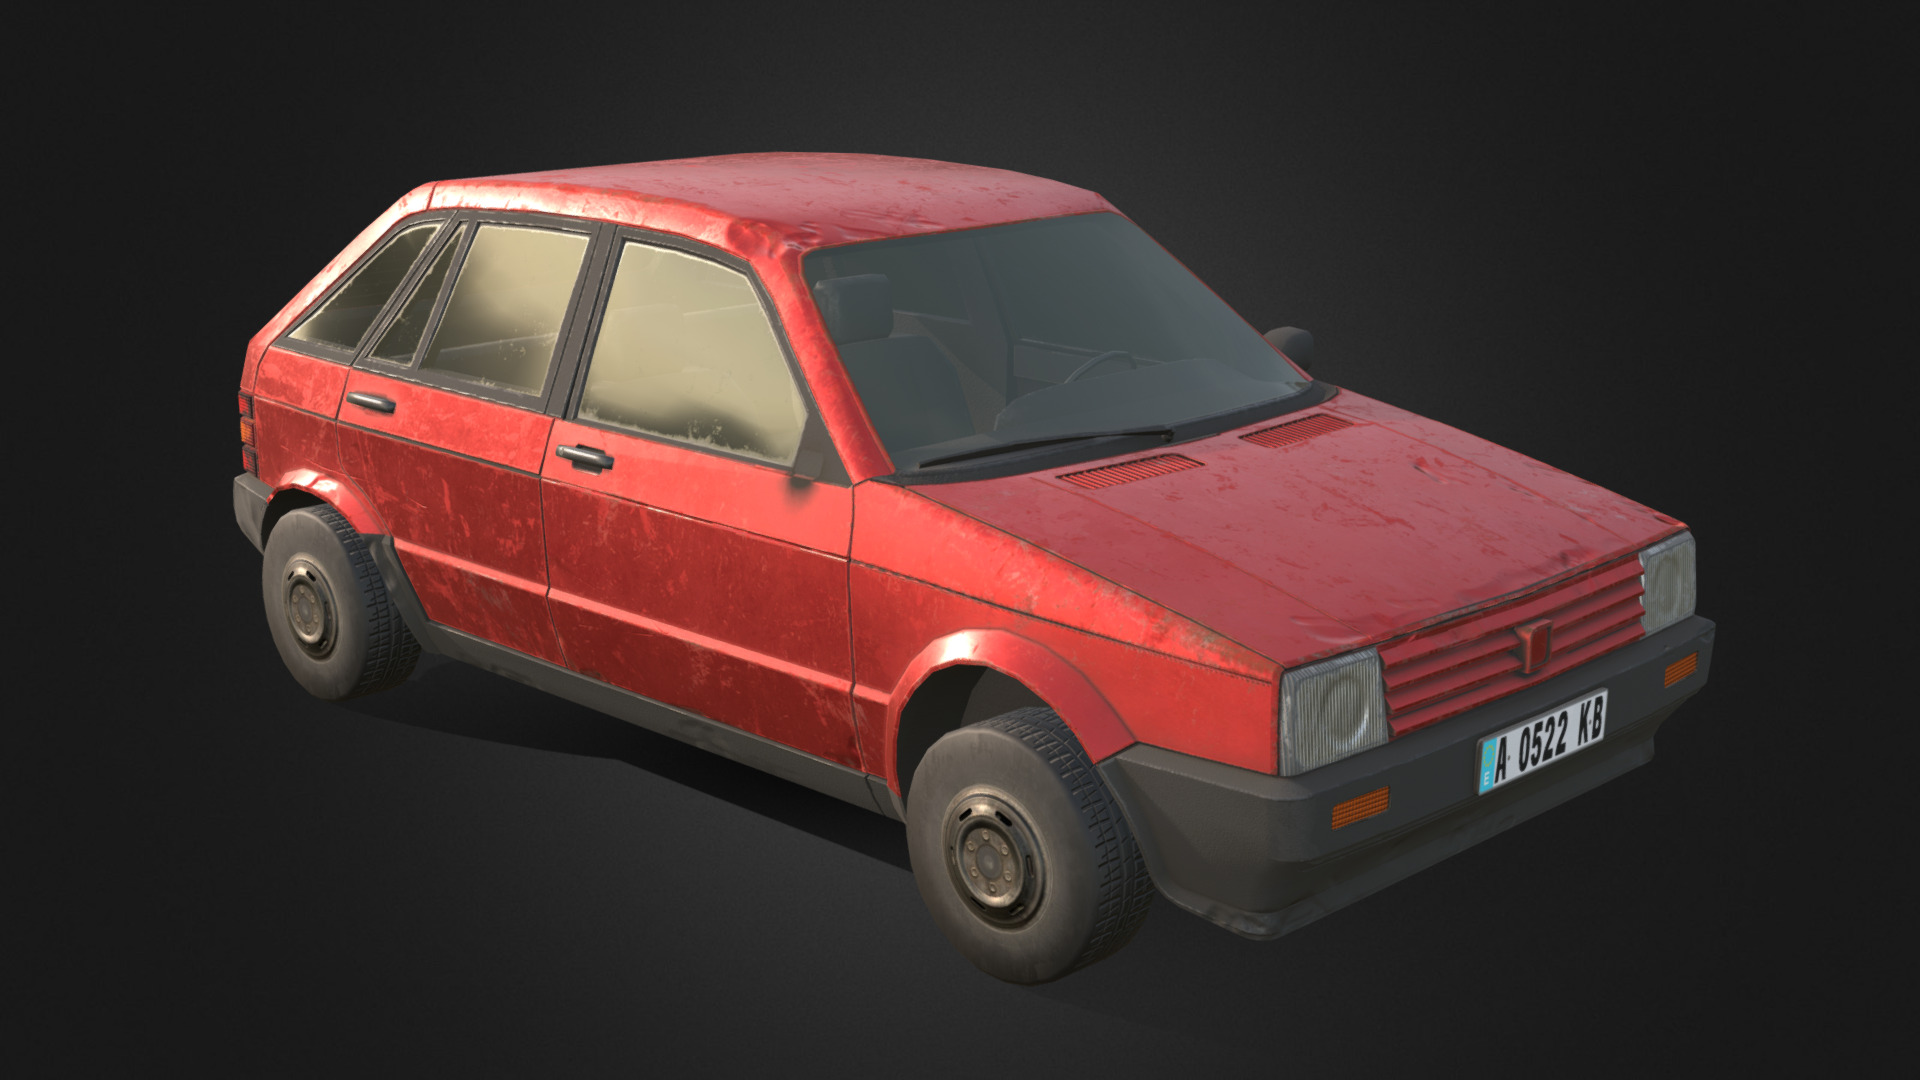 3D model Car 1 - This is a 3D model of the Car 1. The 3D model is about a red car parked.